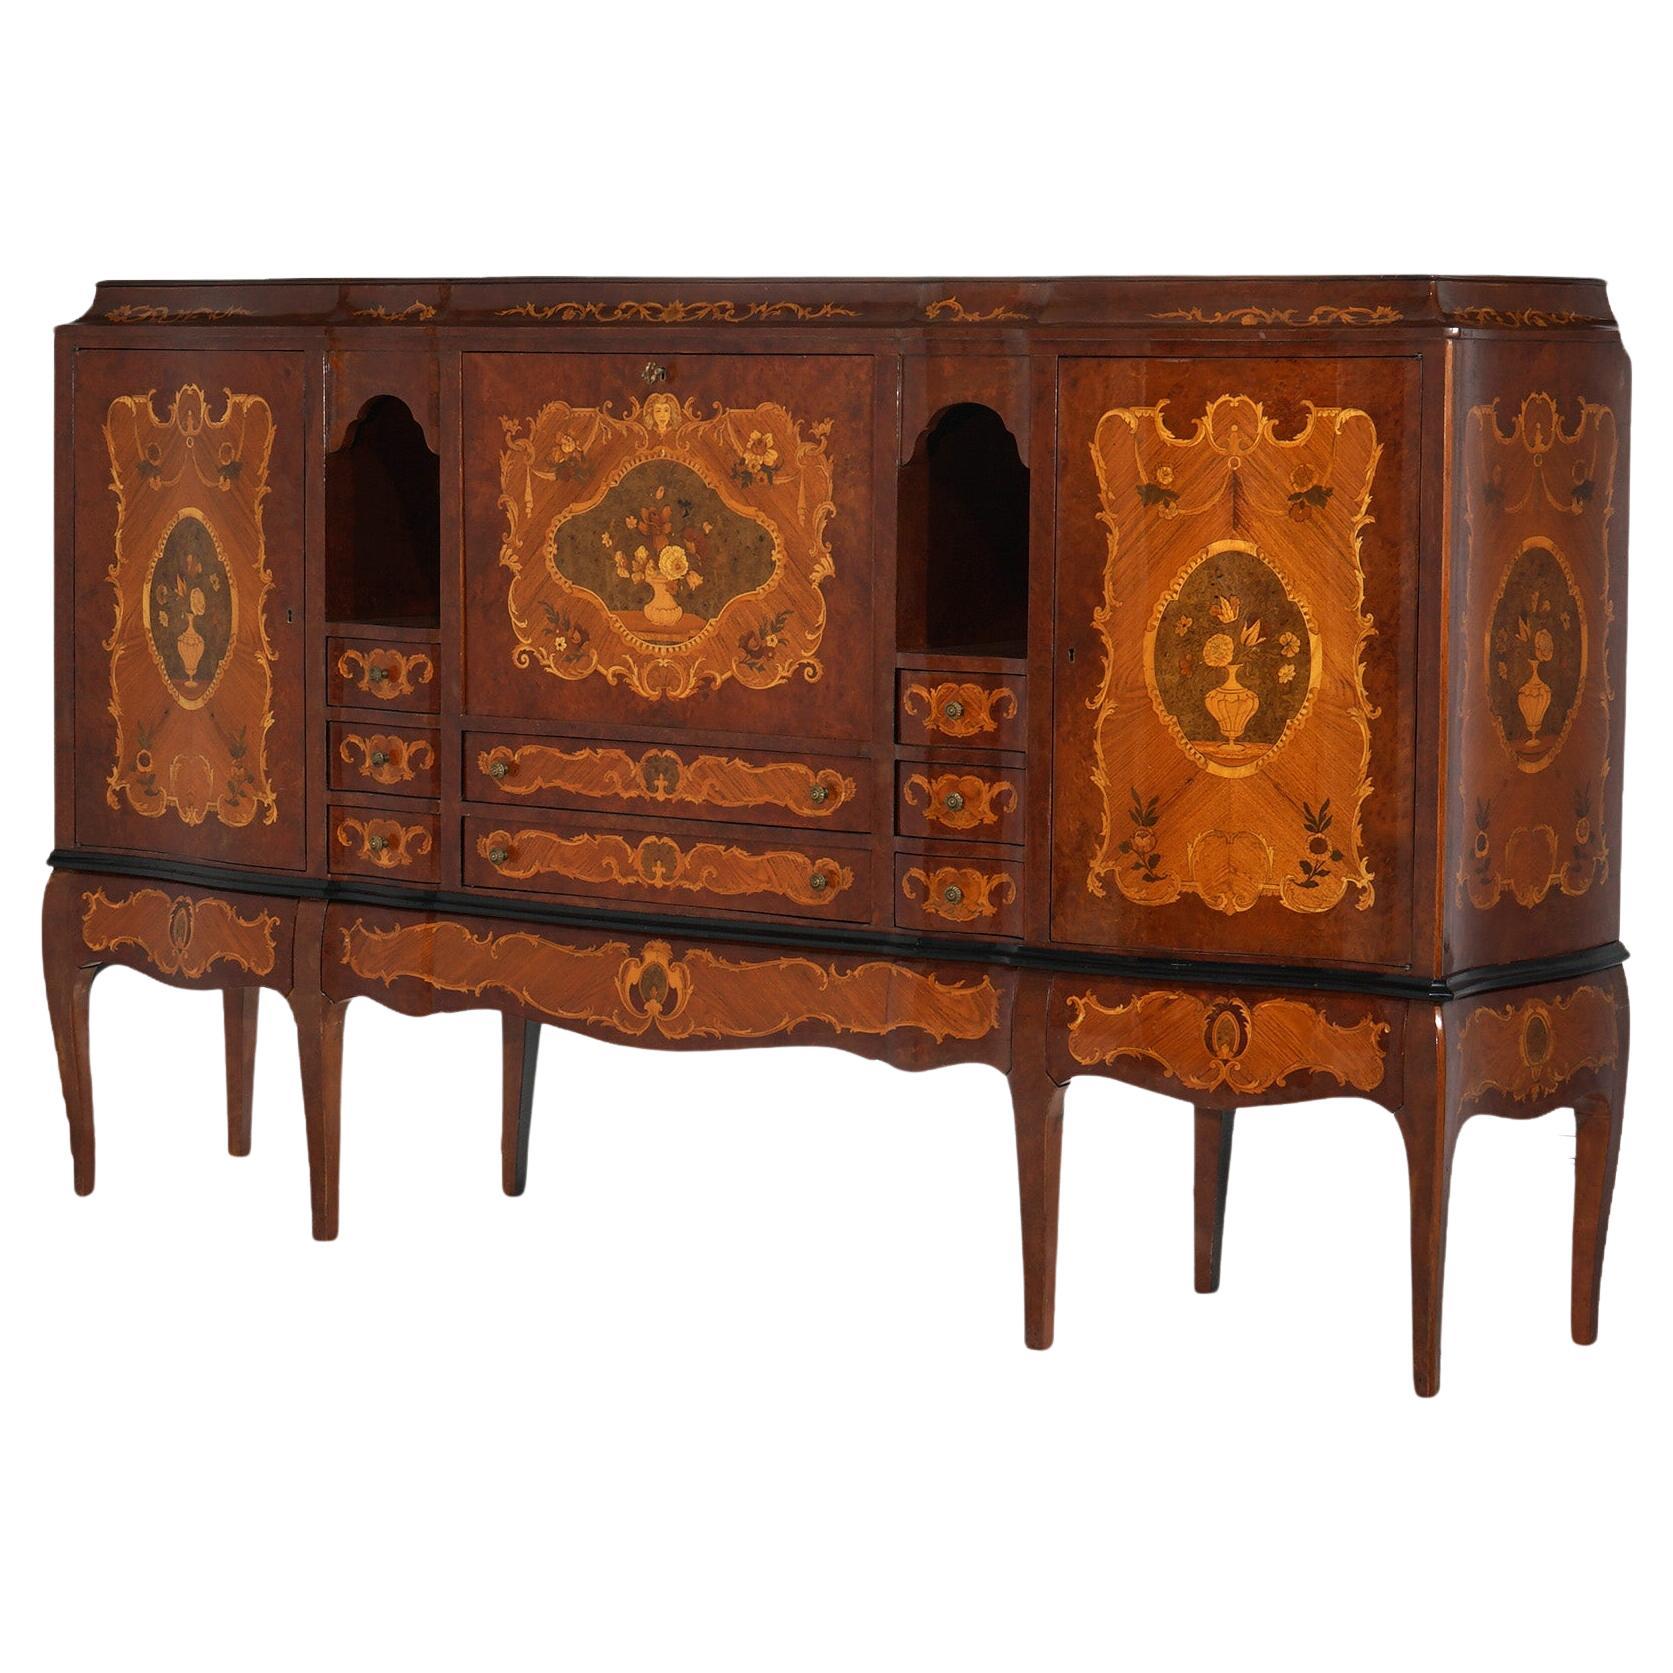 Antique French Kingwood Satinwood & Burlwood Marquetry Inlaid Sideboard C1930 For Sale